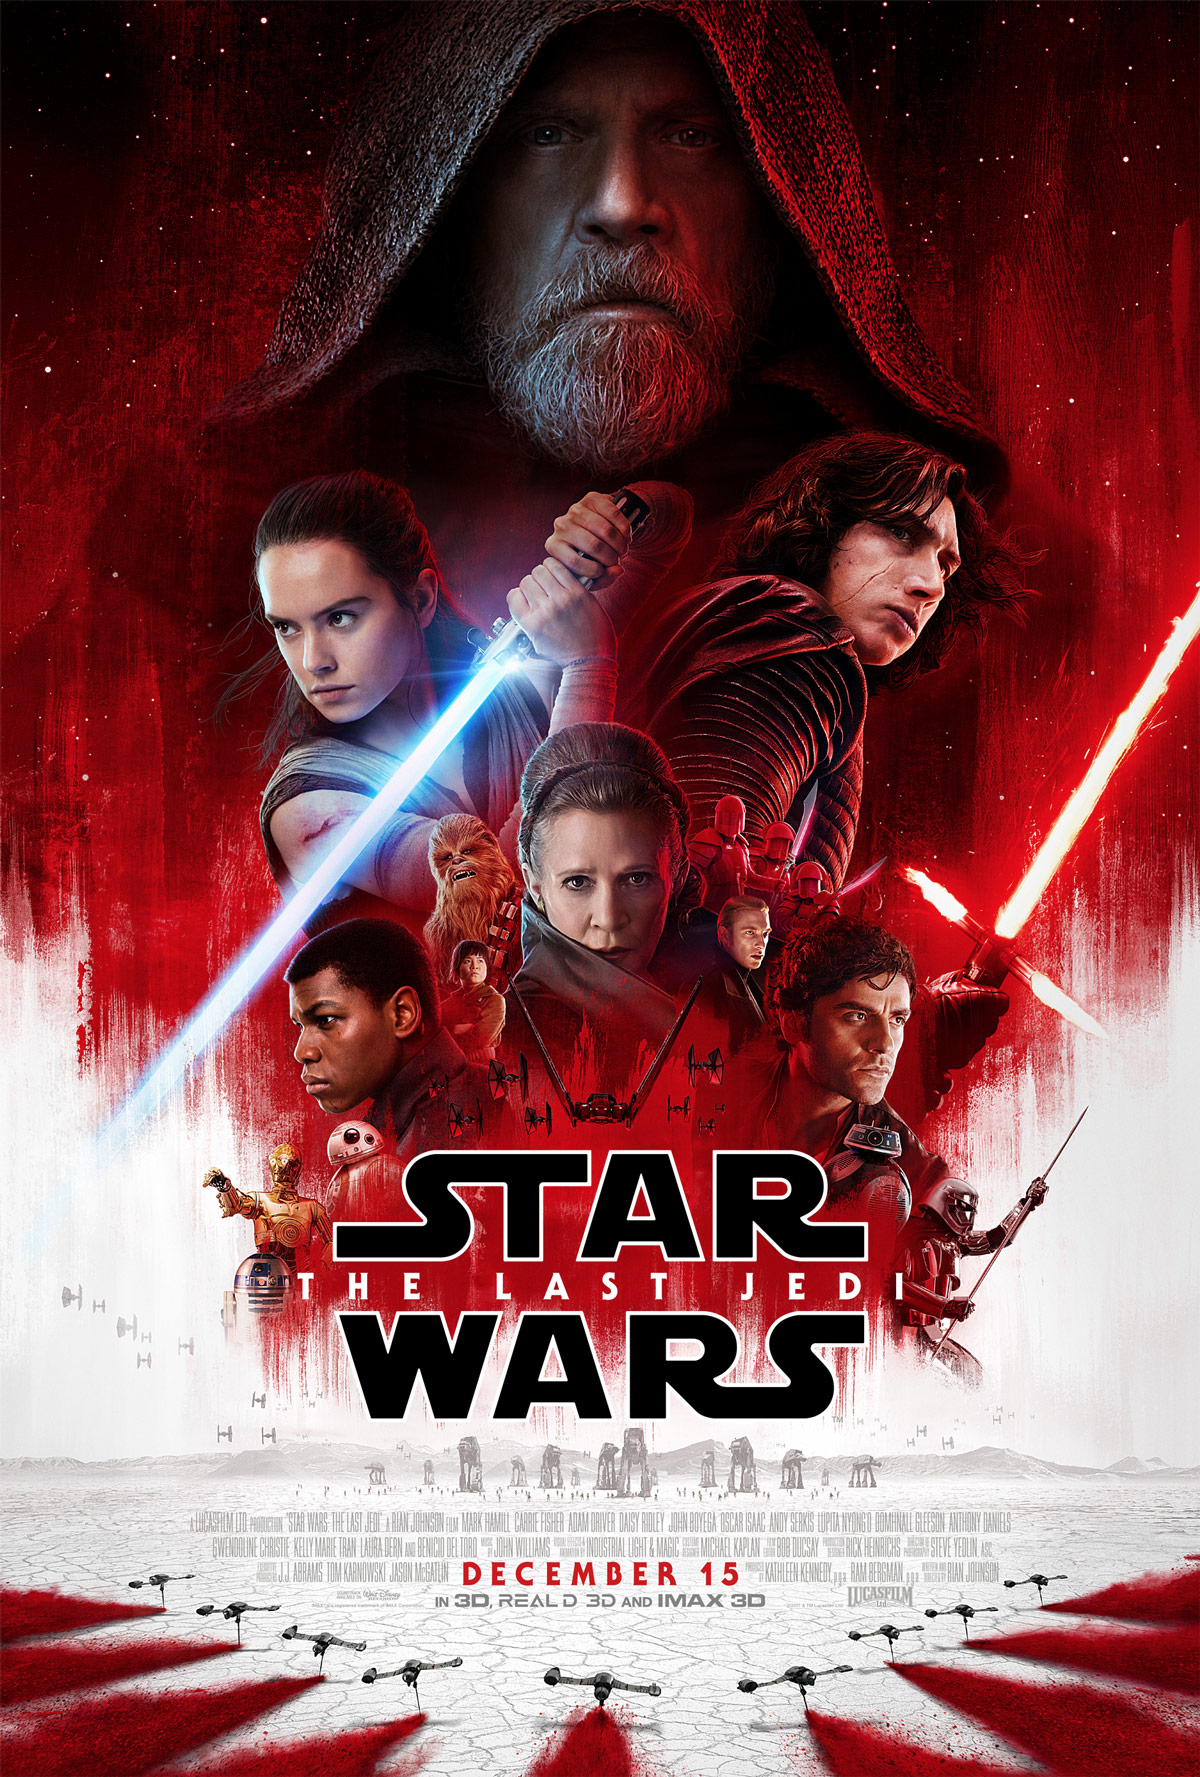 The Last Jedi: Ending moral dualism in Star Wars, by Naumande